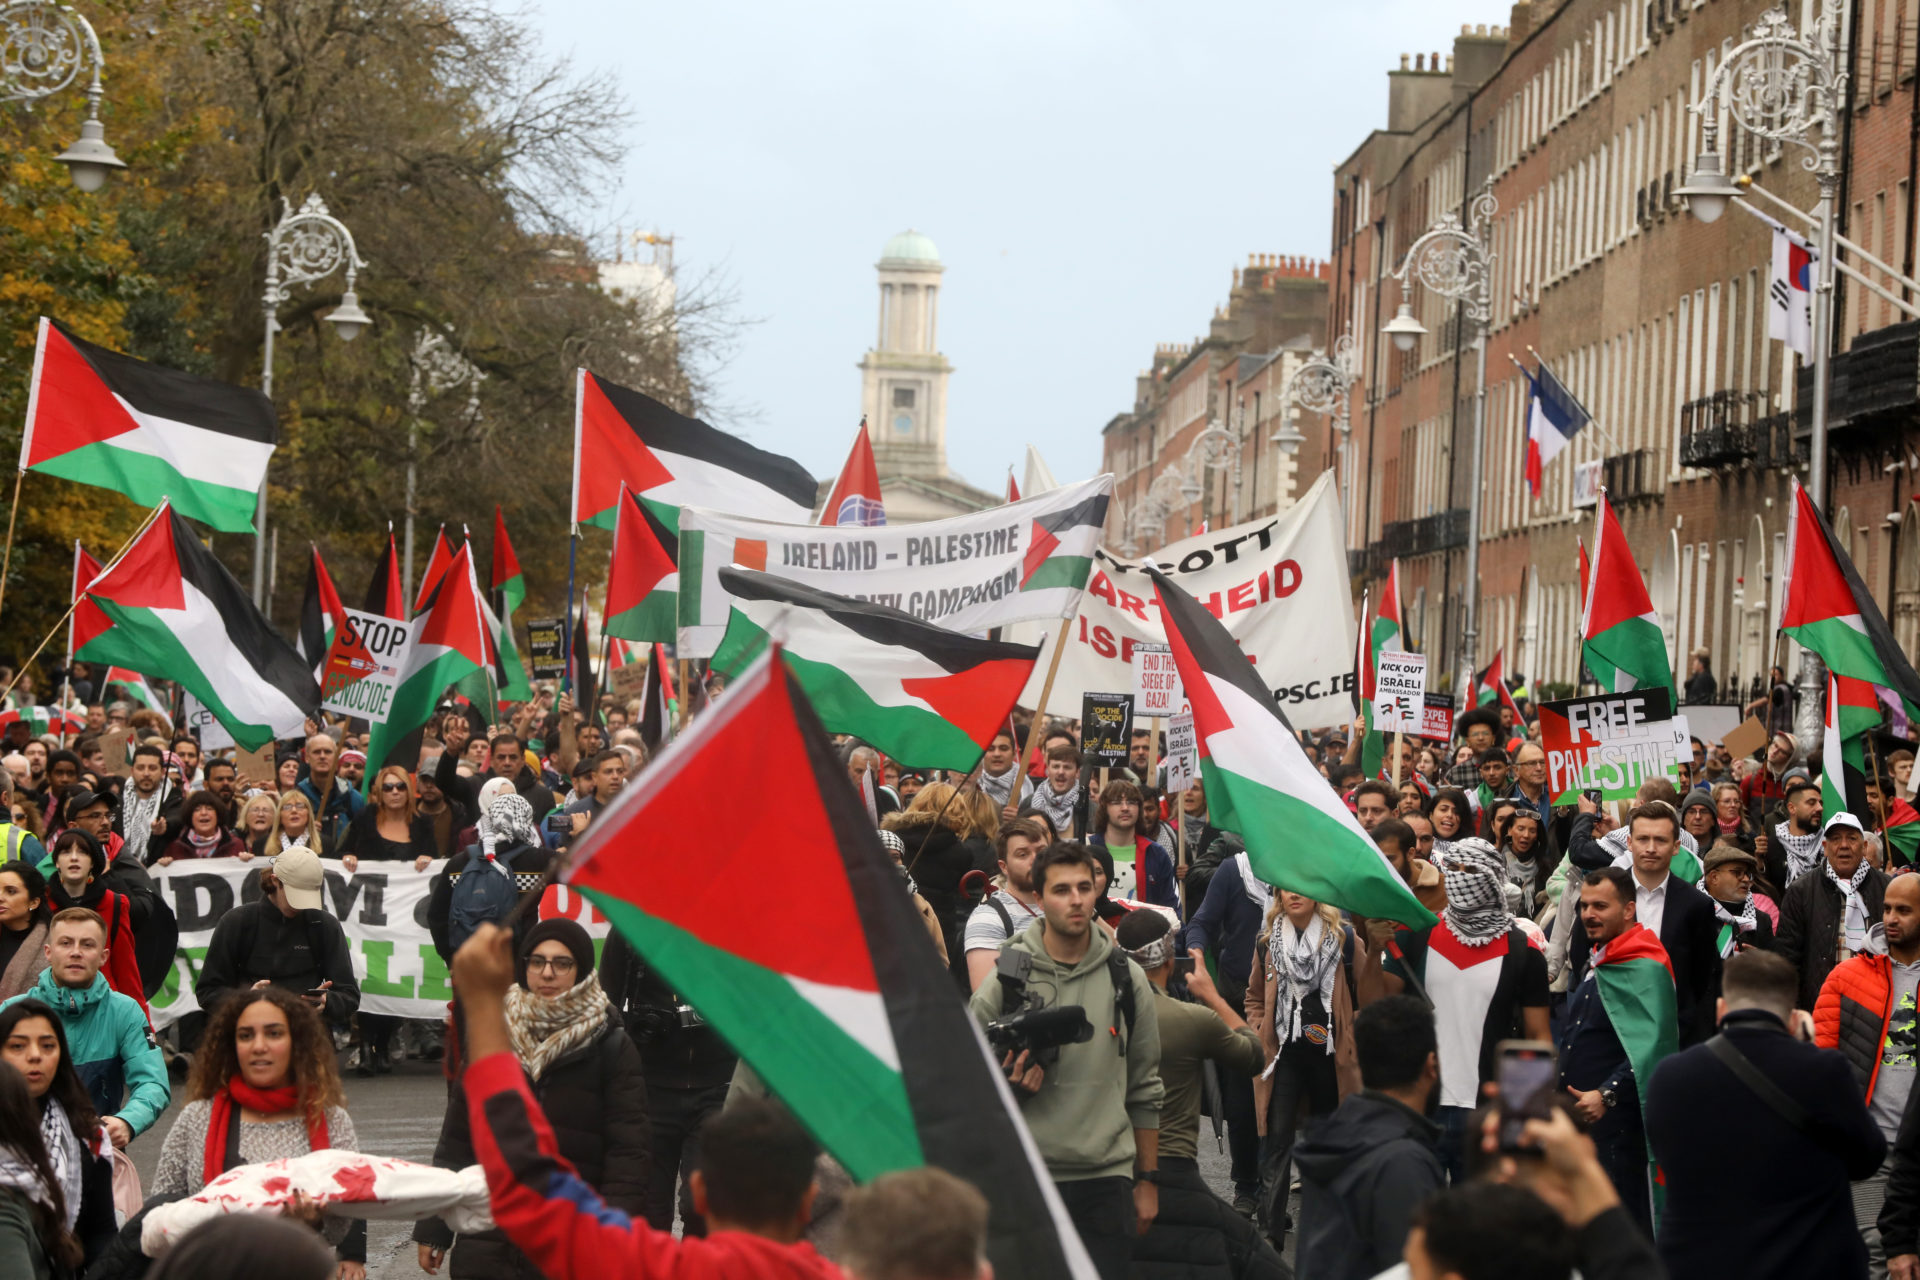 Demonstrations, such as this one in Dublin's Merrion Square on 18-11-23, have been taking place around the world in support of Palestine.